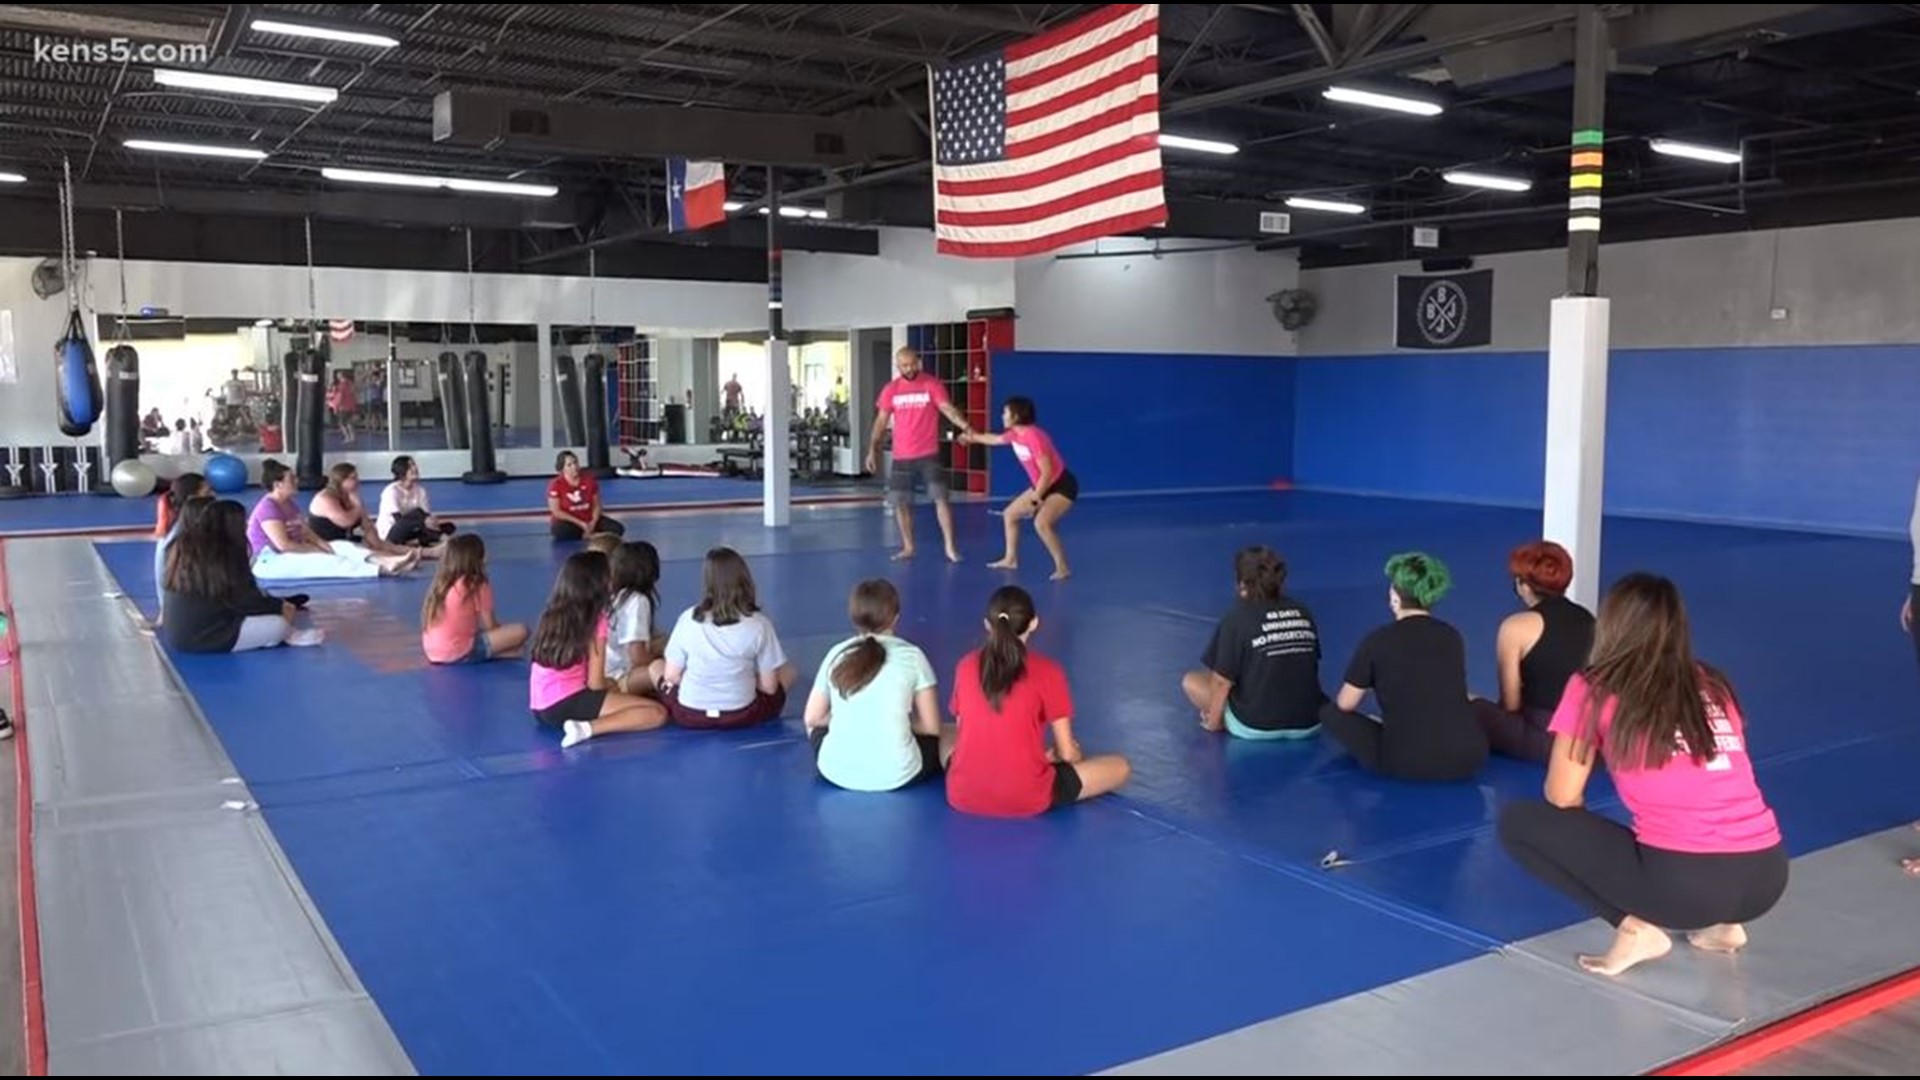 Some of those students spend Saturday learning self-defense tactics as parents take matters into their own hands.